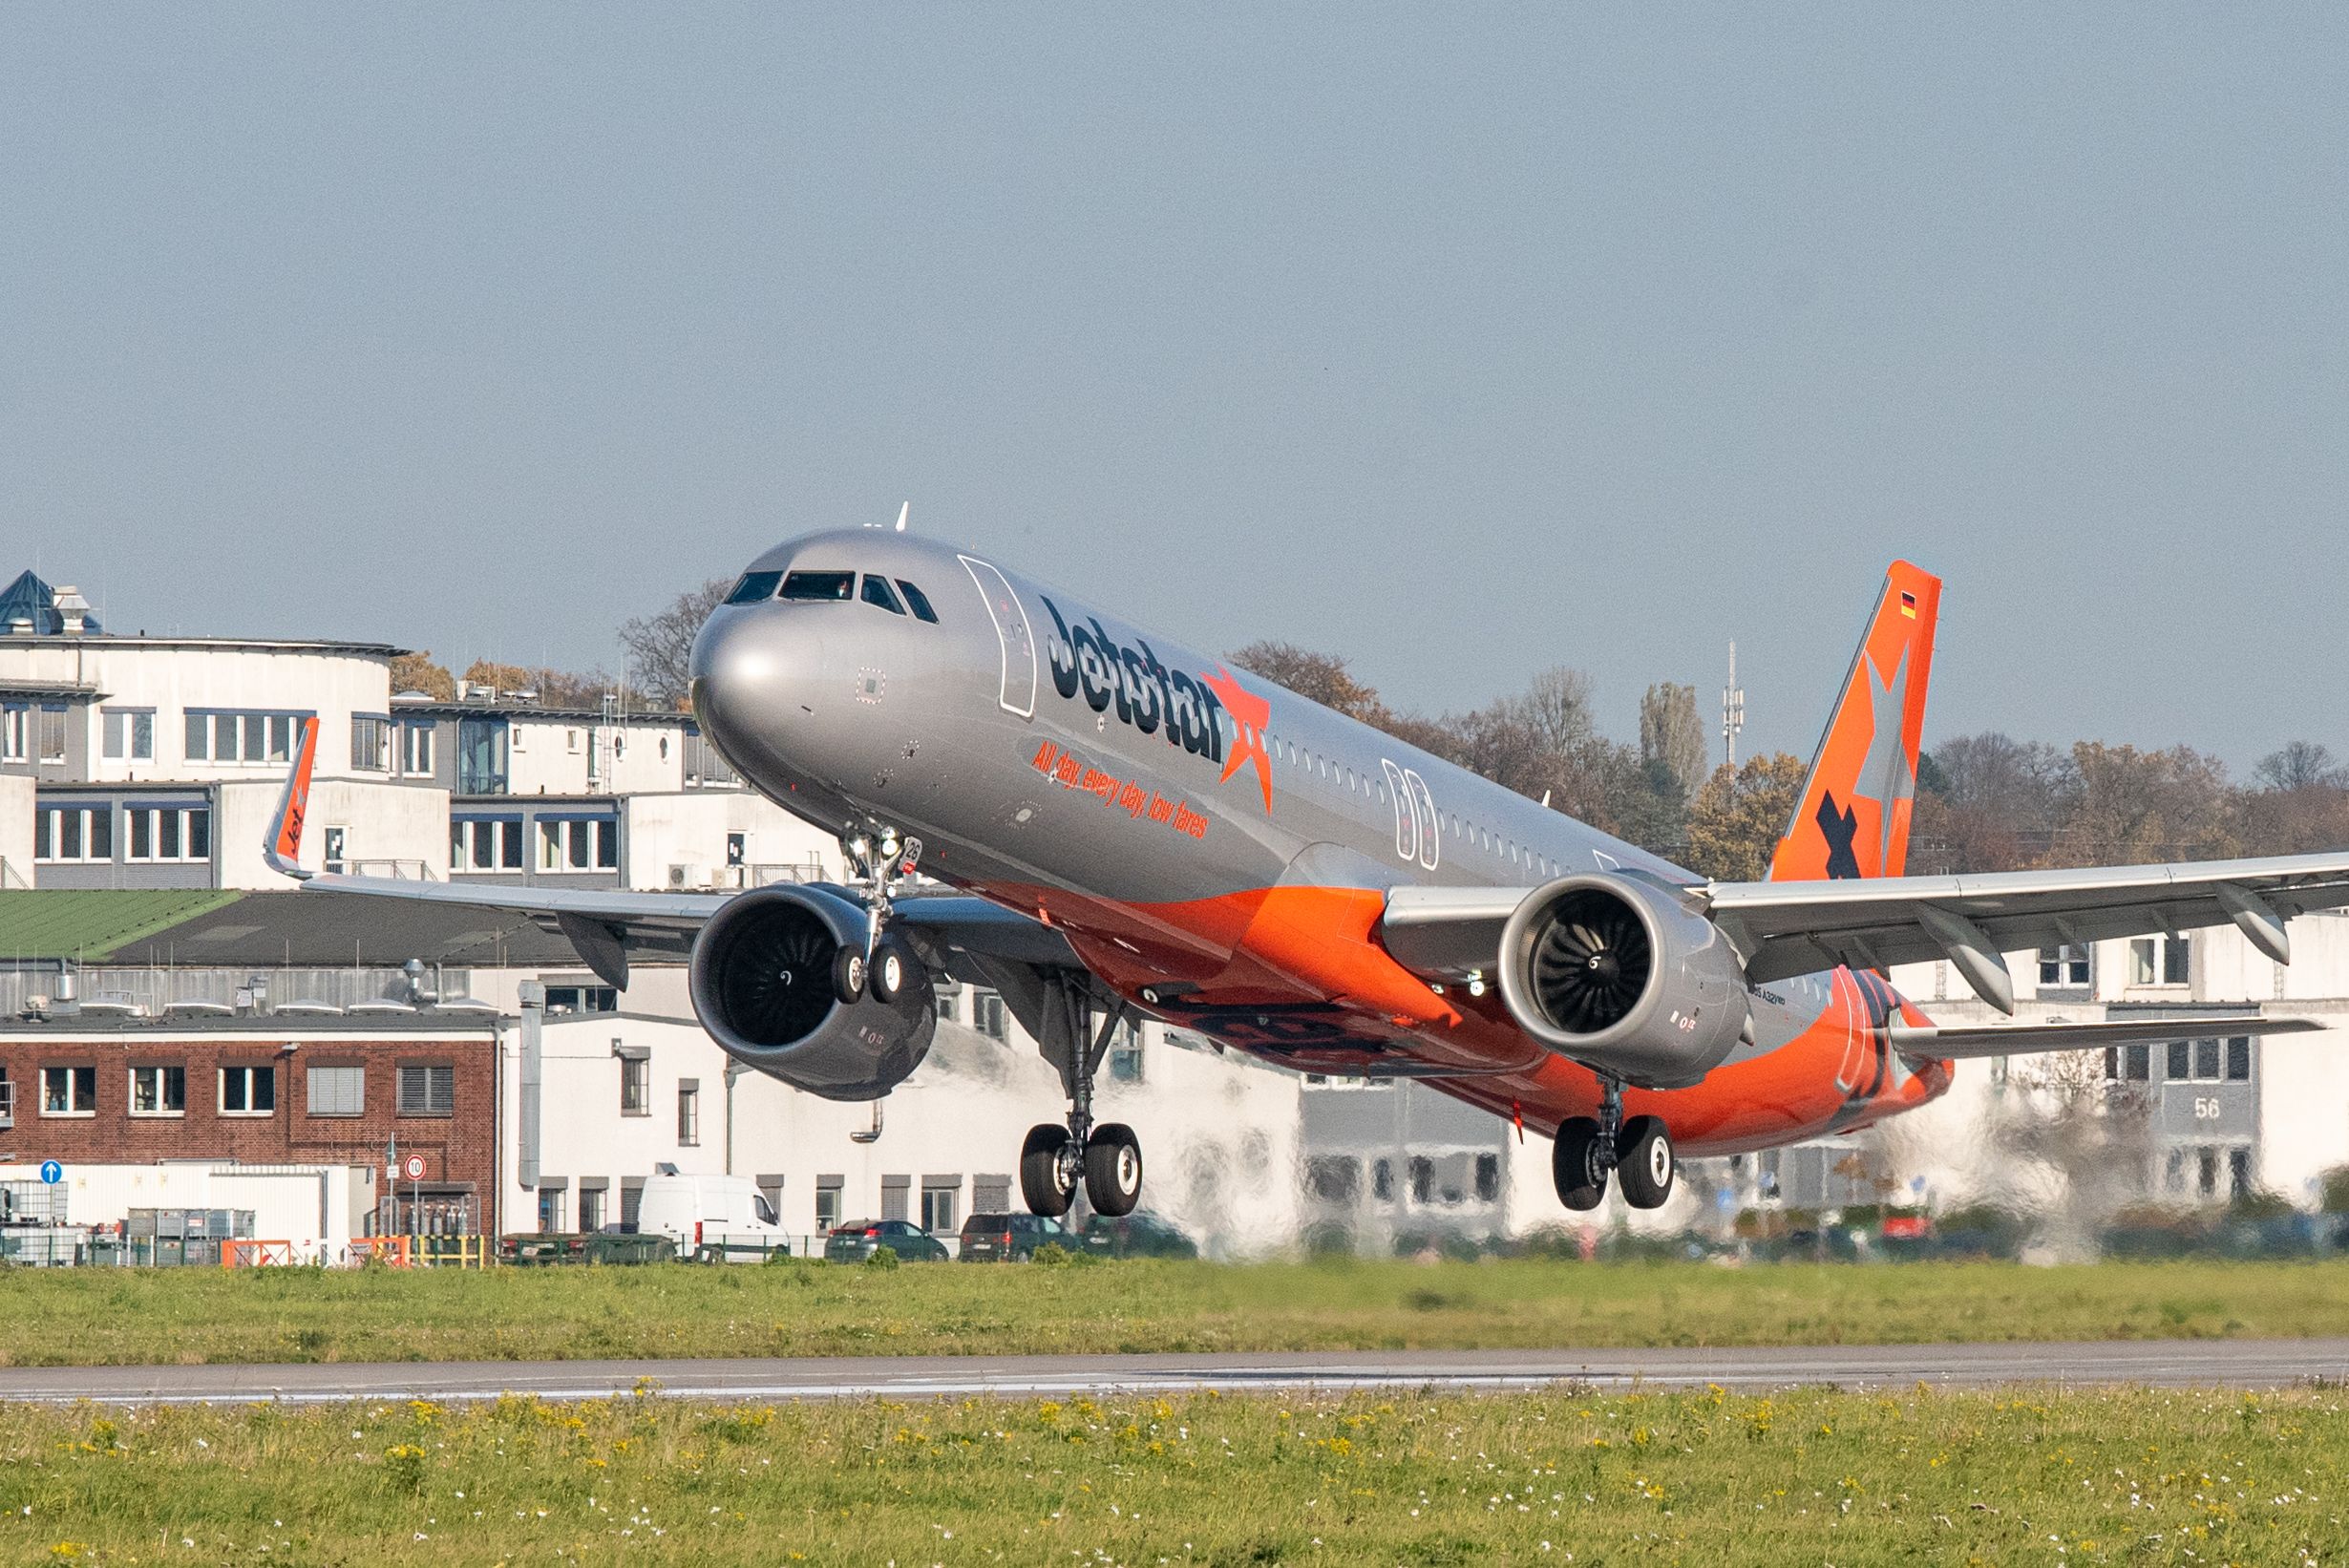 Jetstar Boosts International Flying At Brisbane Airport With Airbus ...